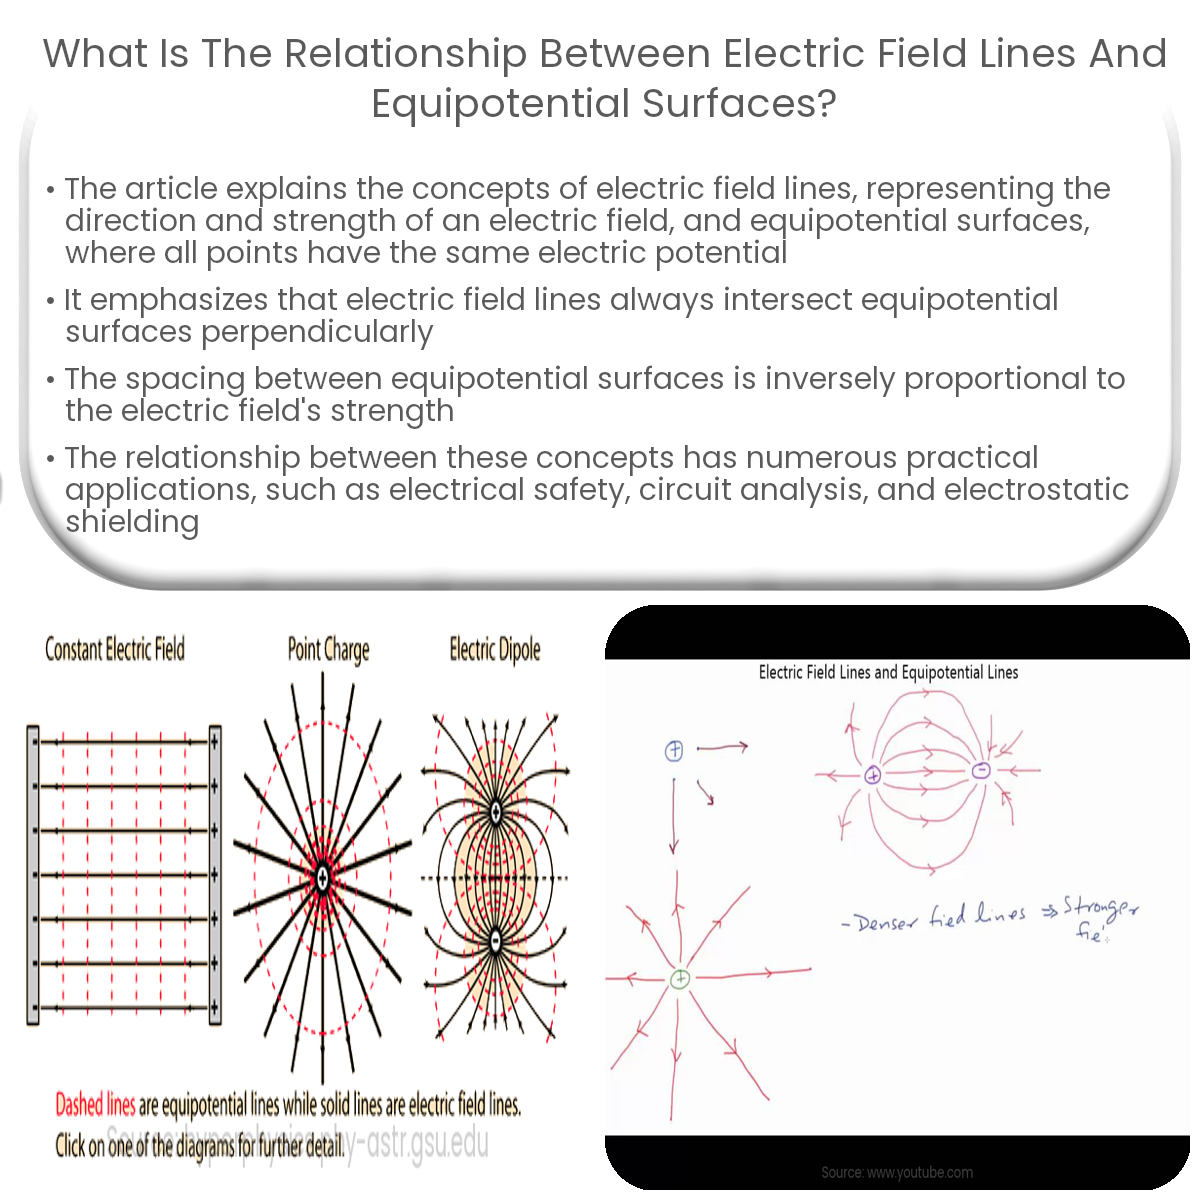 What is the relationship between electric field lines and equipotential surfaces?